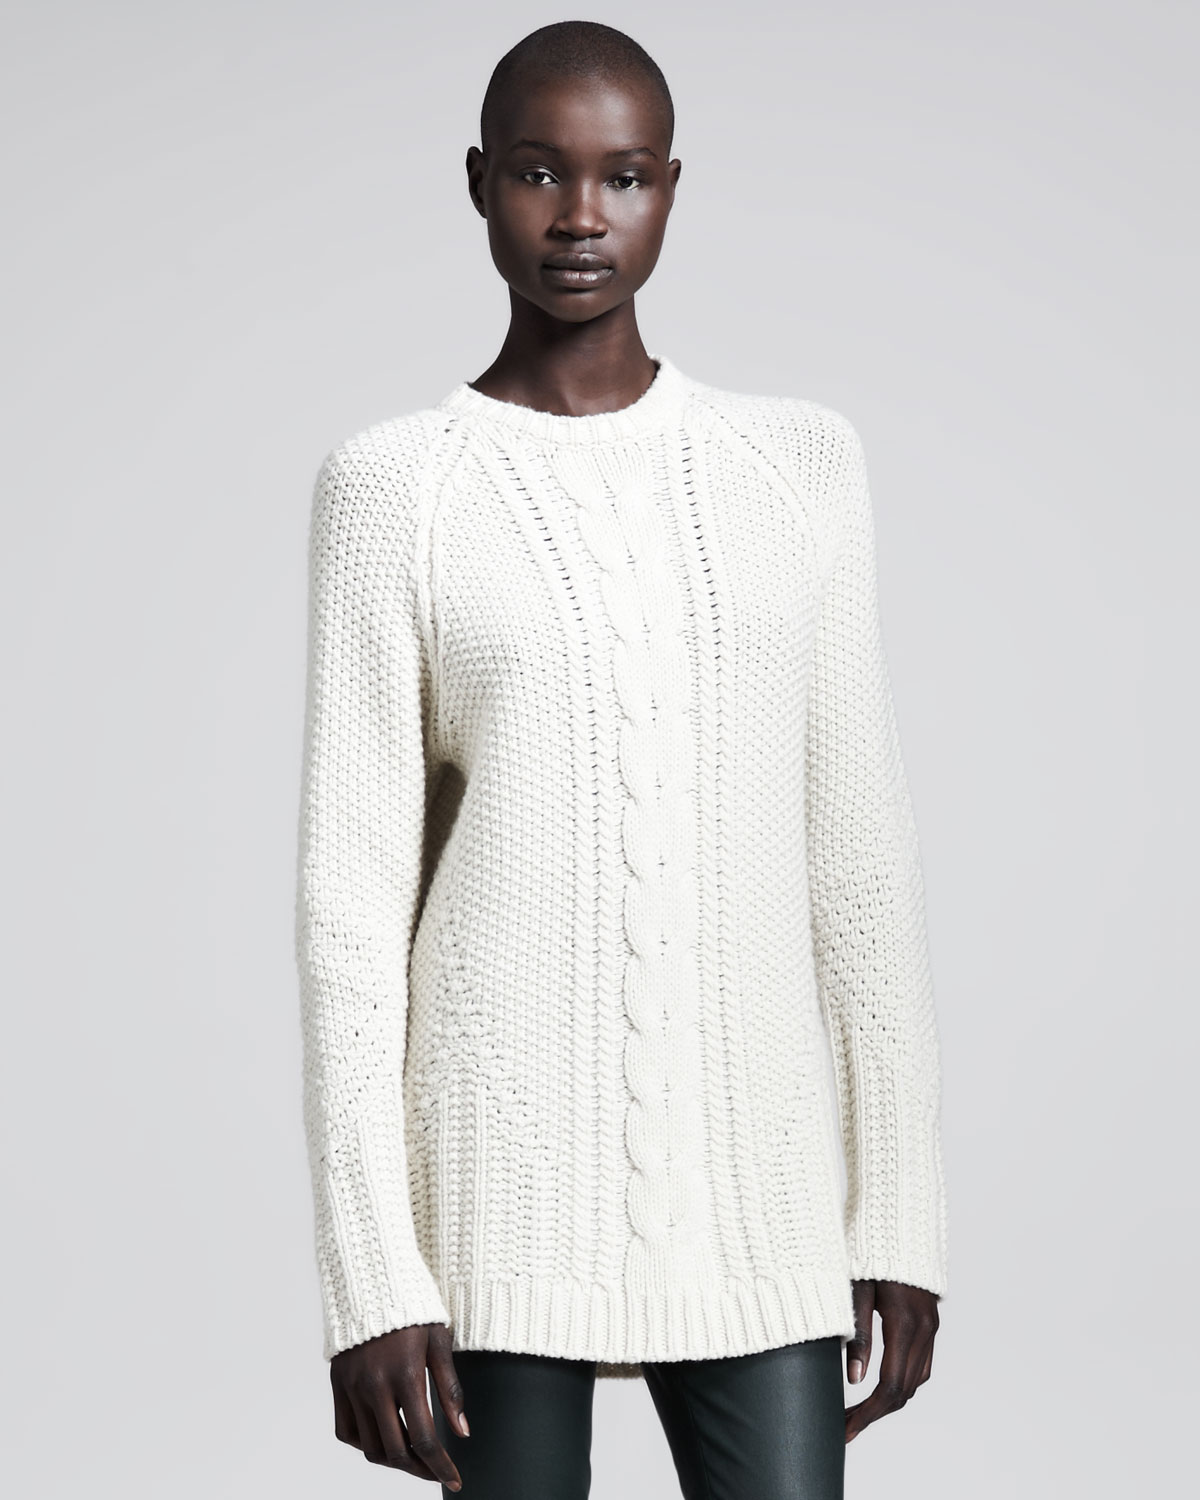 Lyst - The row Chunky Woolcashmere Sweater in White